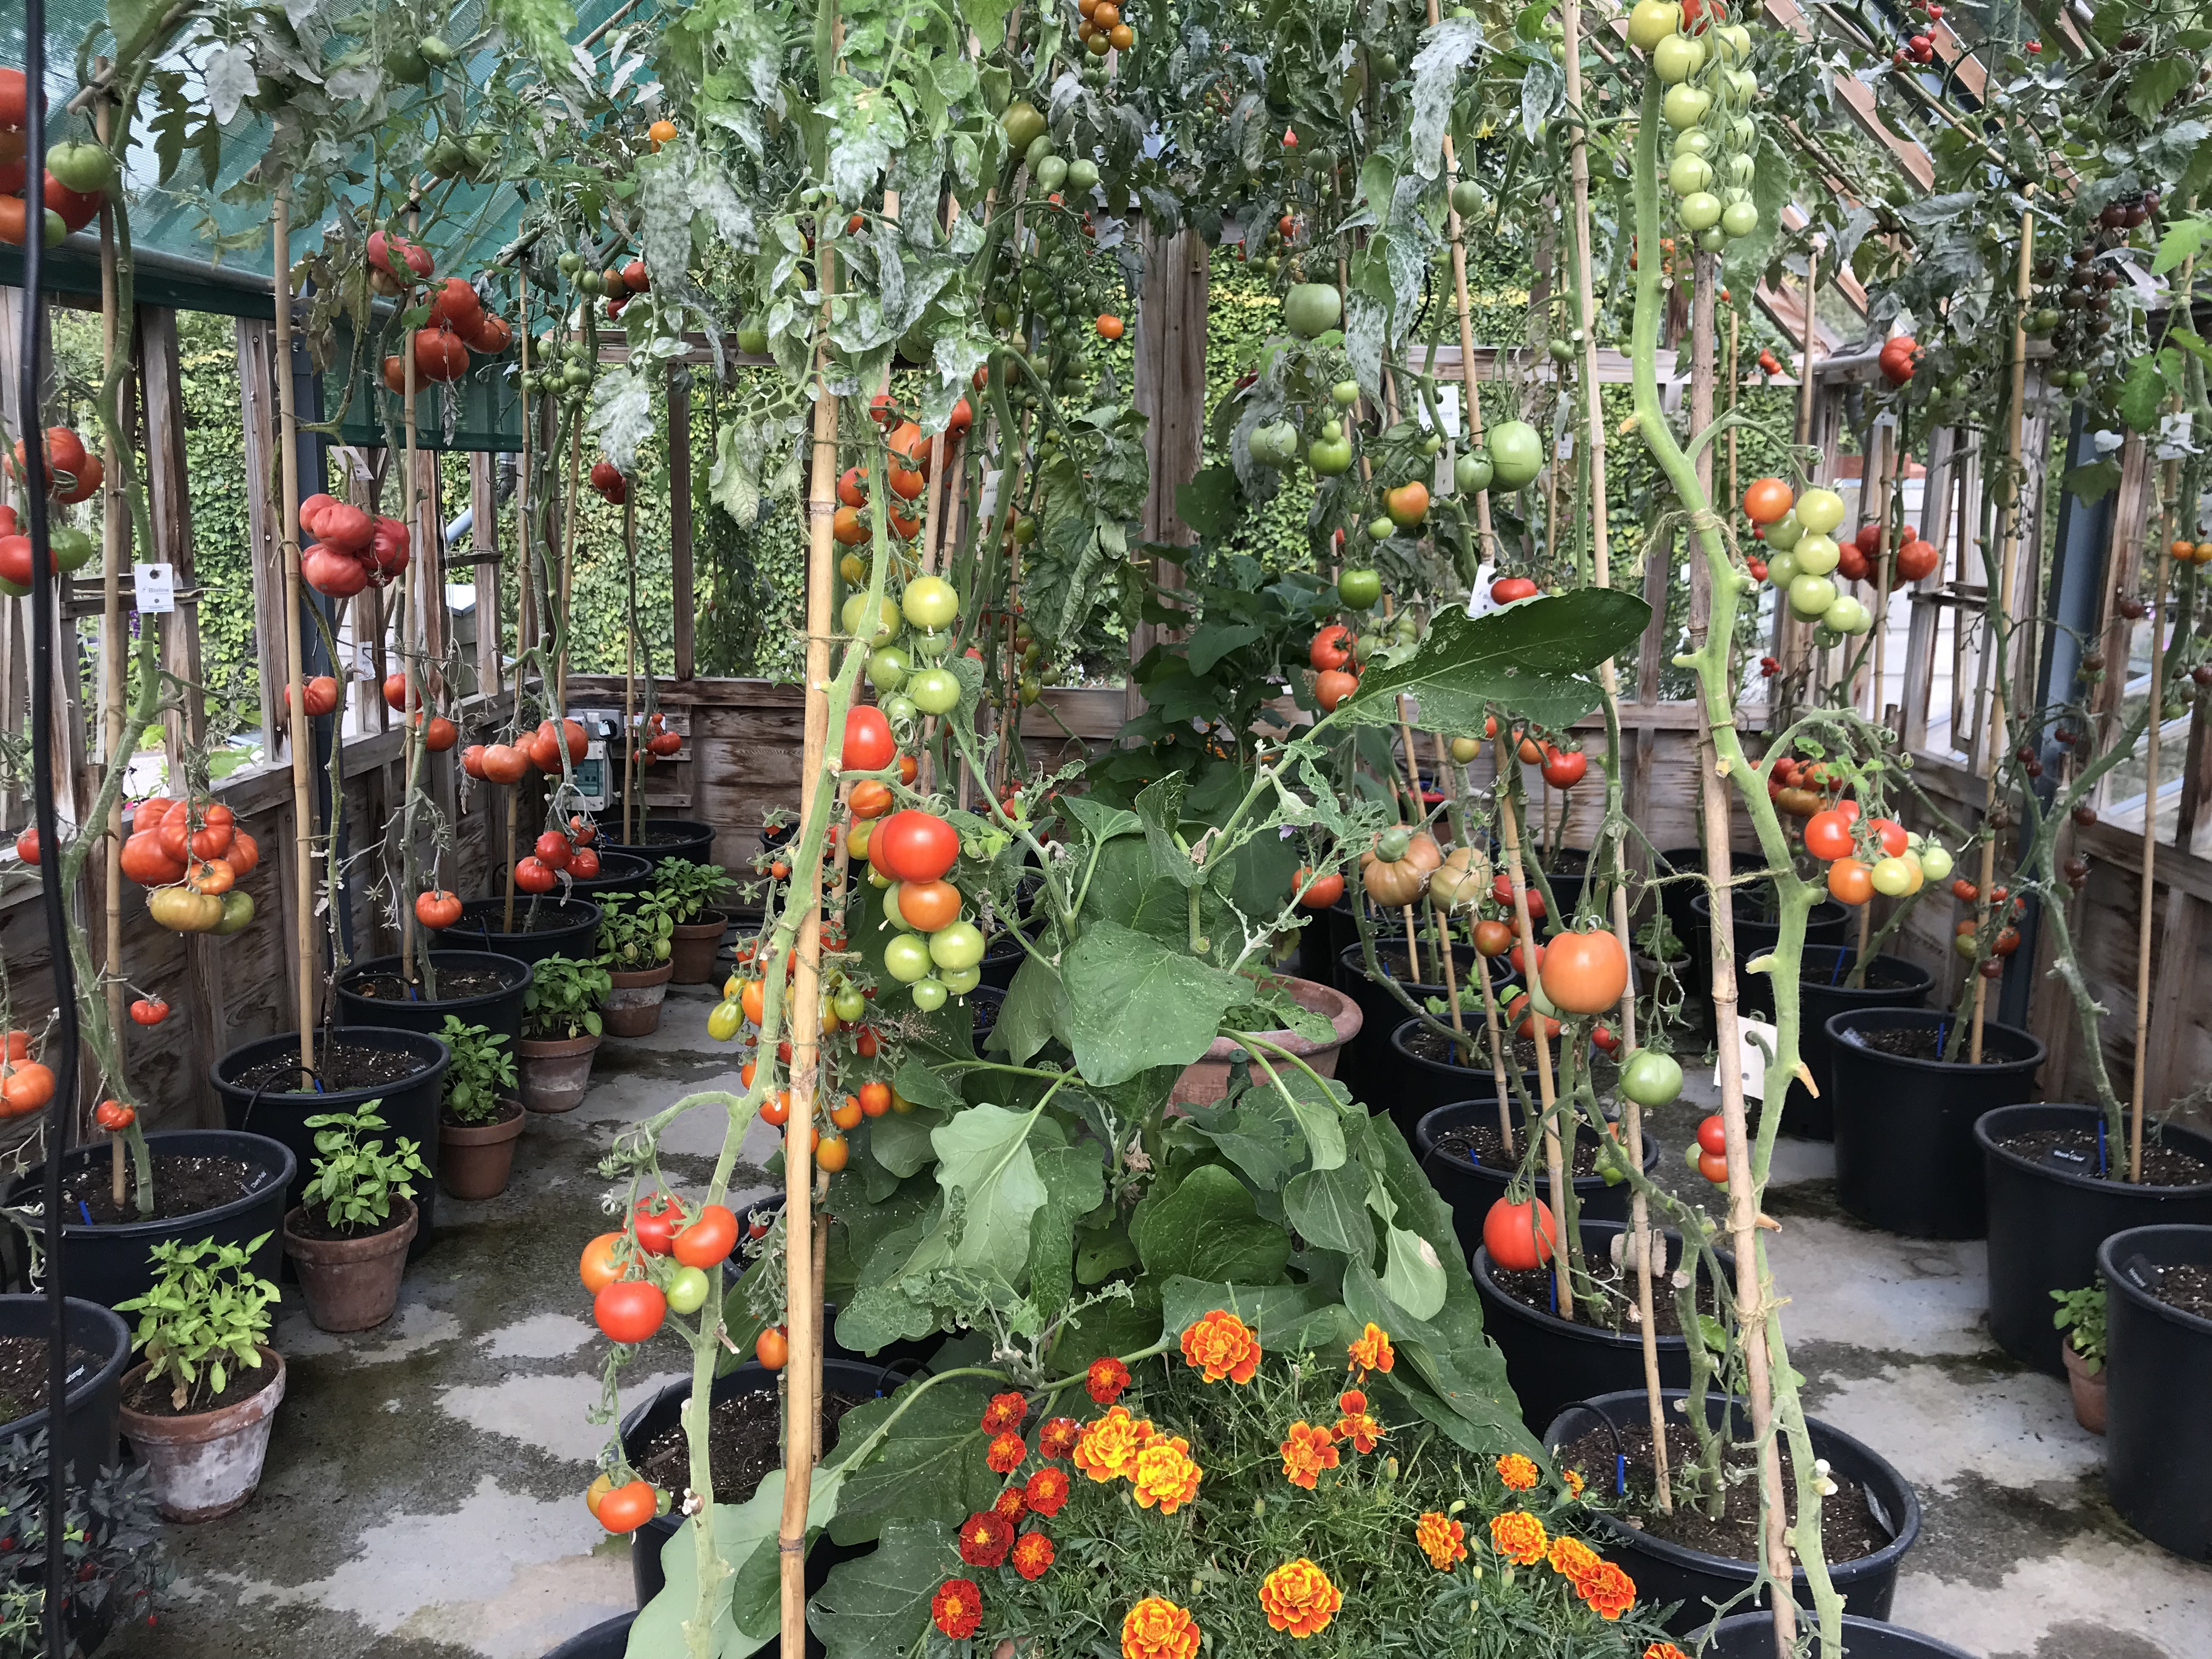 Tomatoes at Harlow Carr